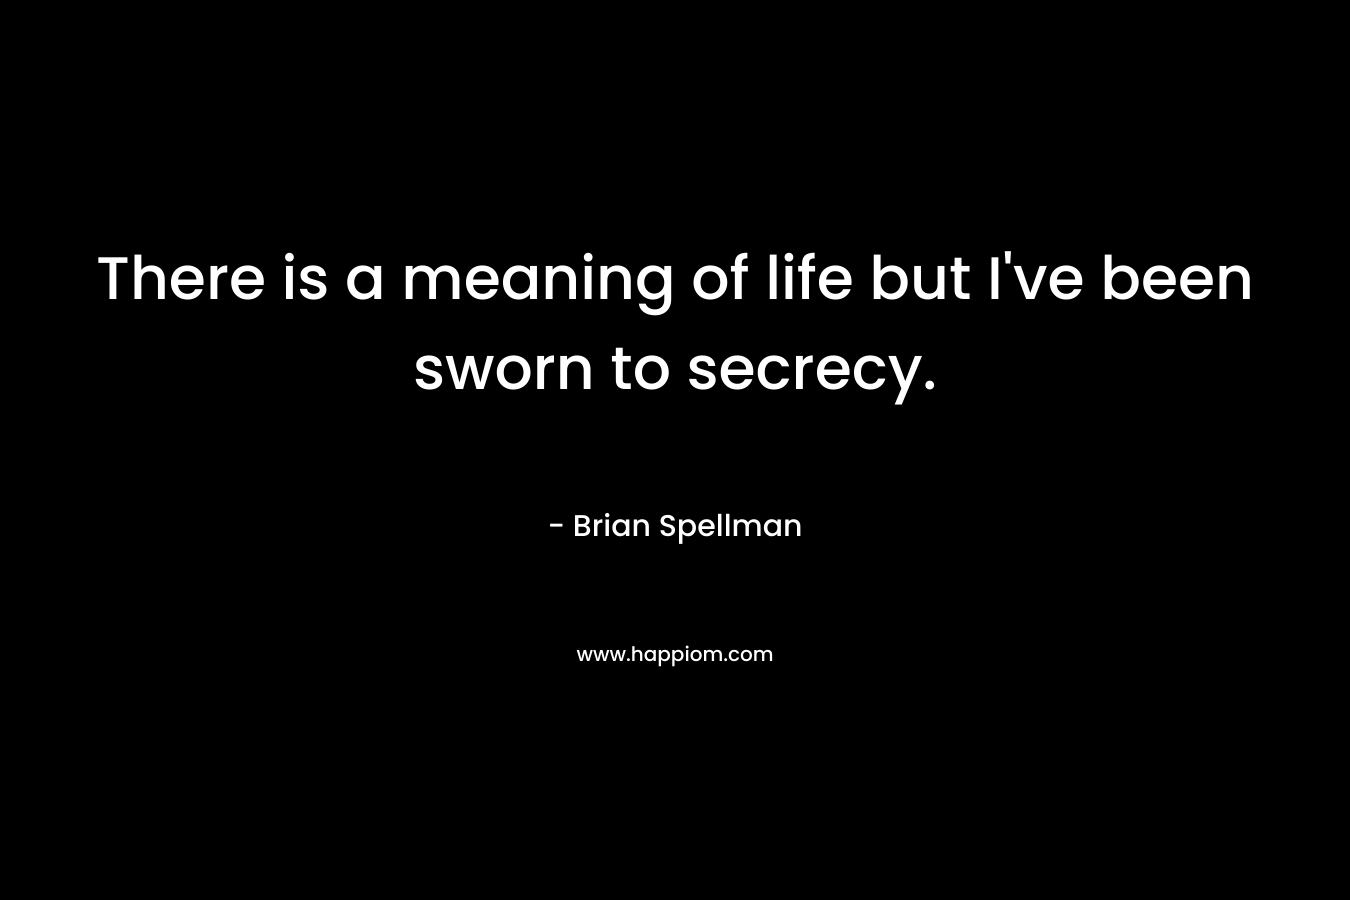 There is a meaning of life but I’ve been sworn to secrecy. – Brian Spellman